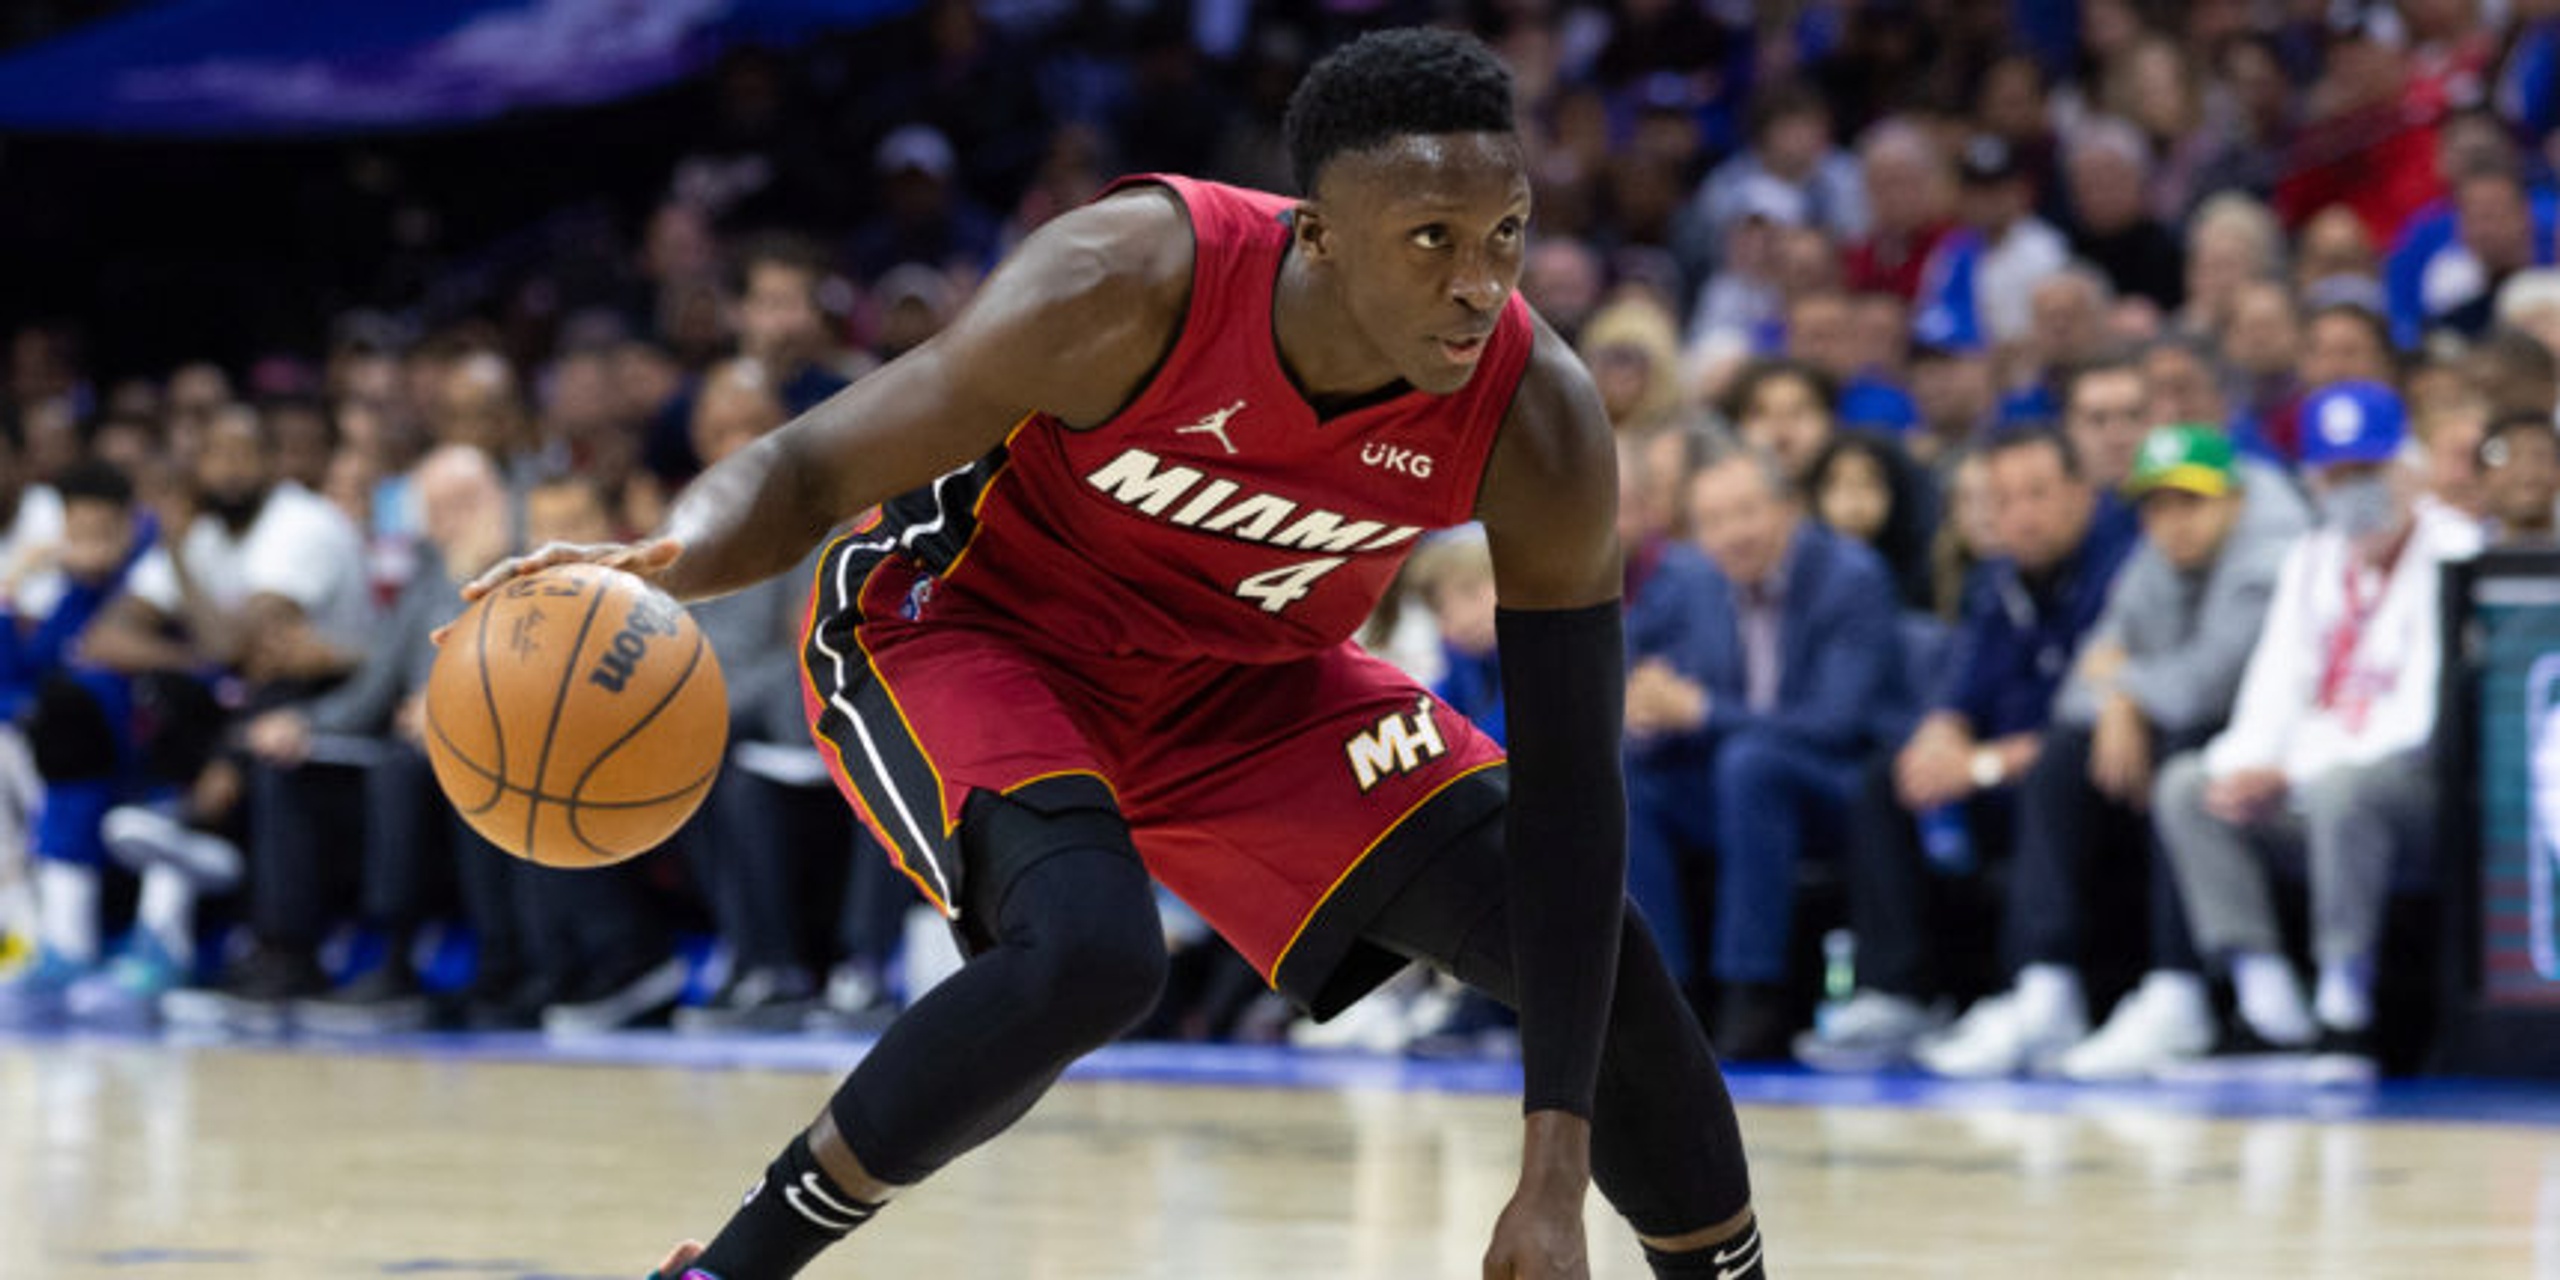 Victor Oladipo staying ready and making the most of every opportunity